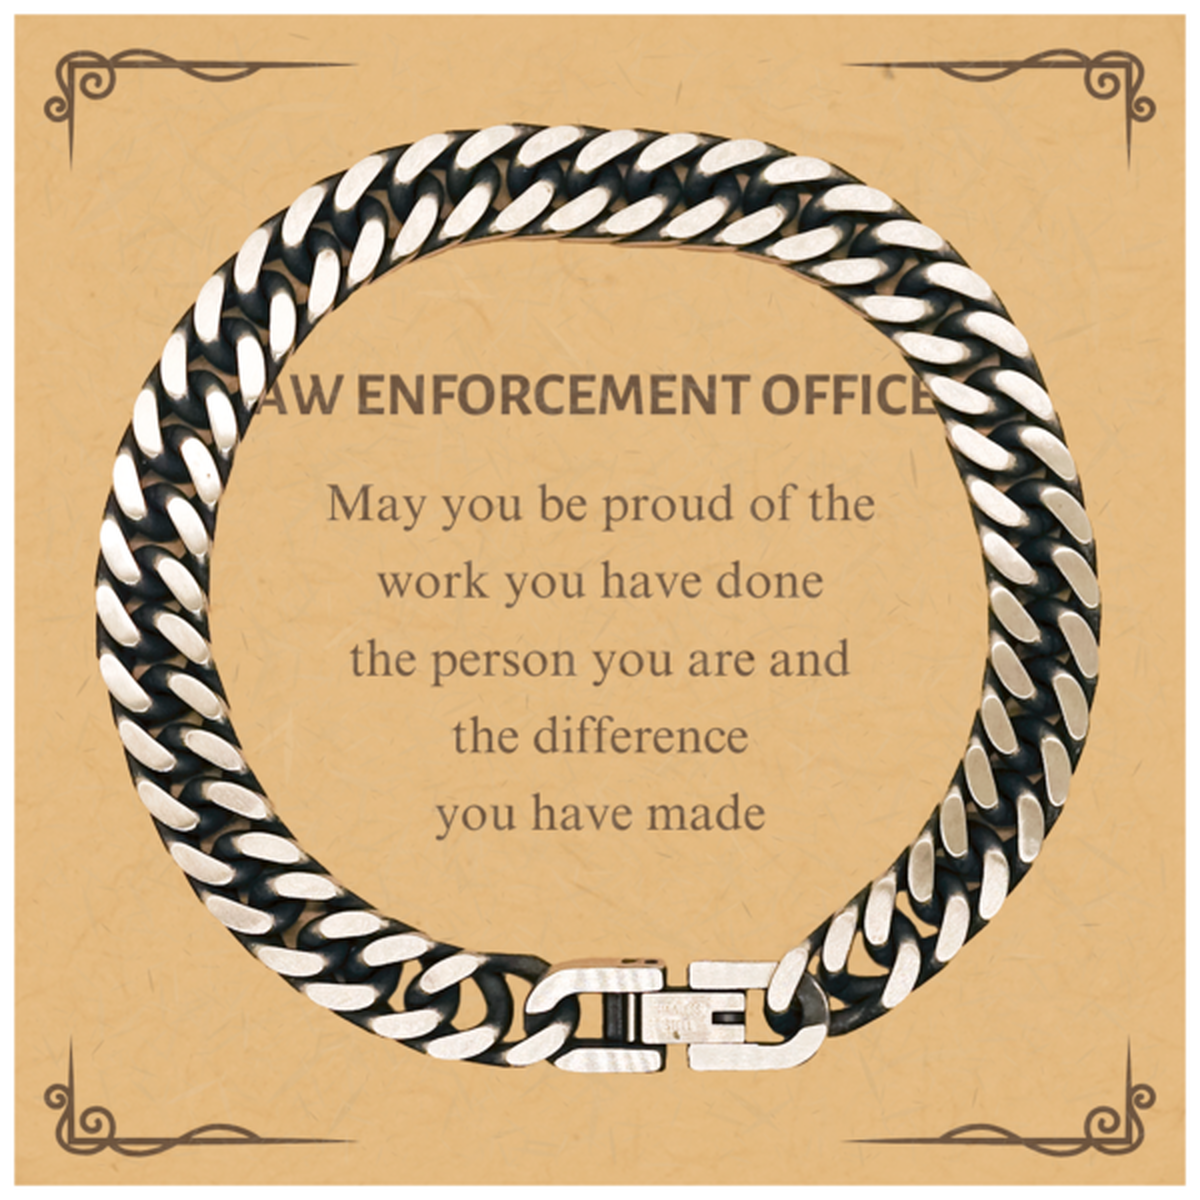 Law Enforcement Officer May you be proud of the work you have done, Retirement Law Enforcement Officer Cuban Link Chain Bracelet for Colleague Appreciation Gifts Amazing for Law Enforcement Officer